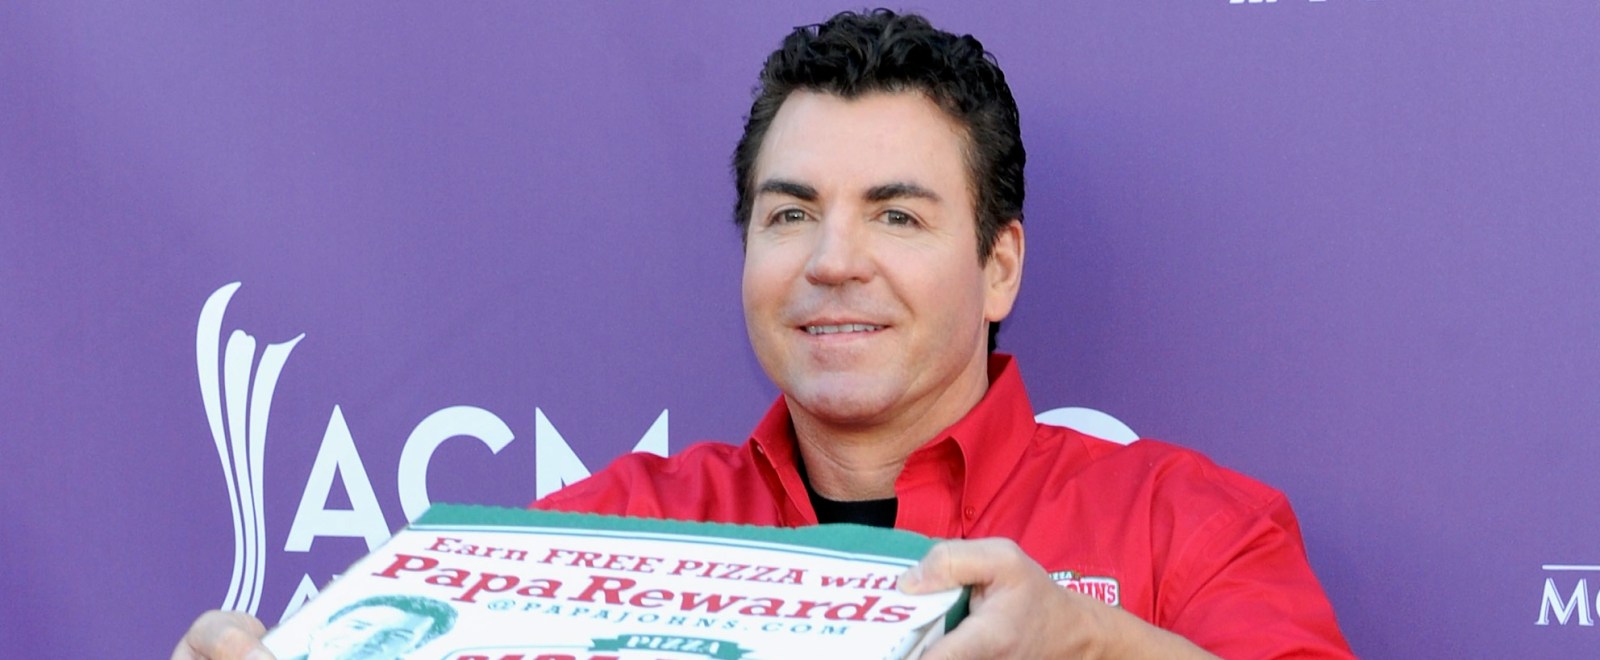 Two Knoxville Papa John's pizza makers to compete in Papa John's